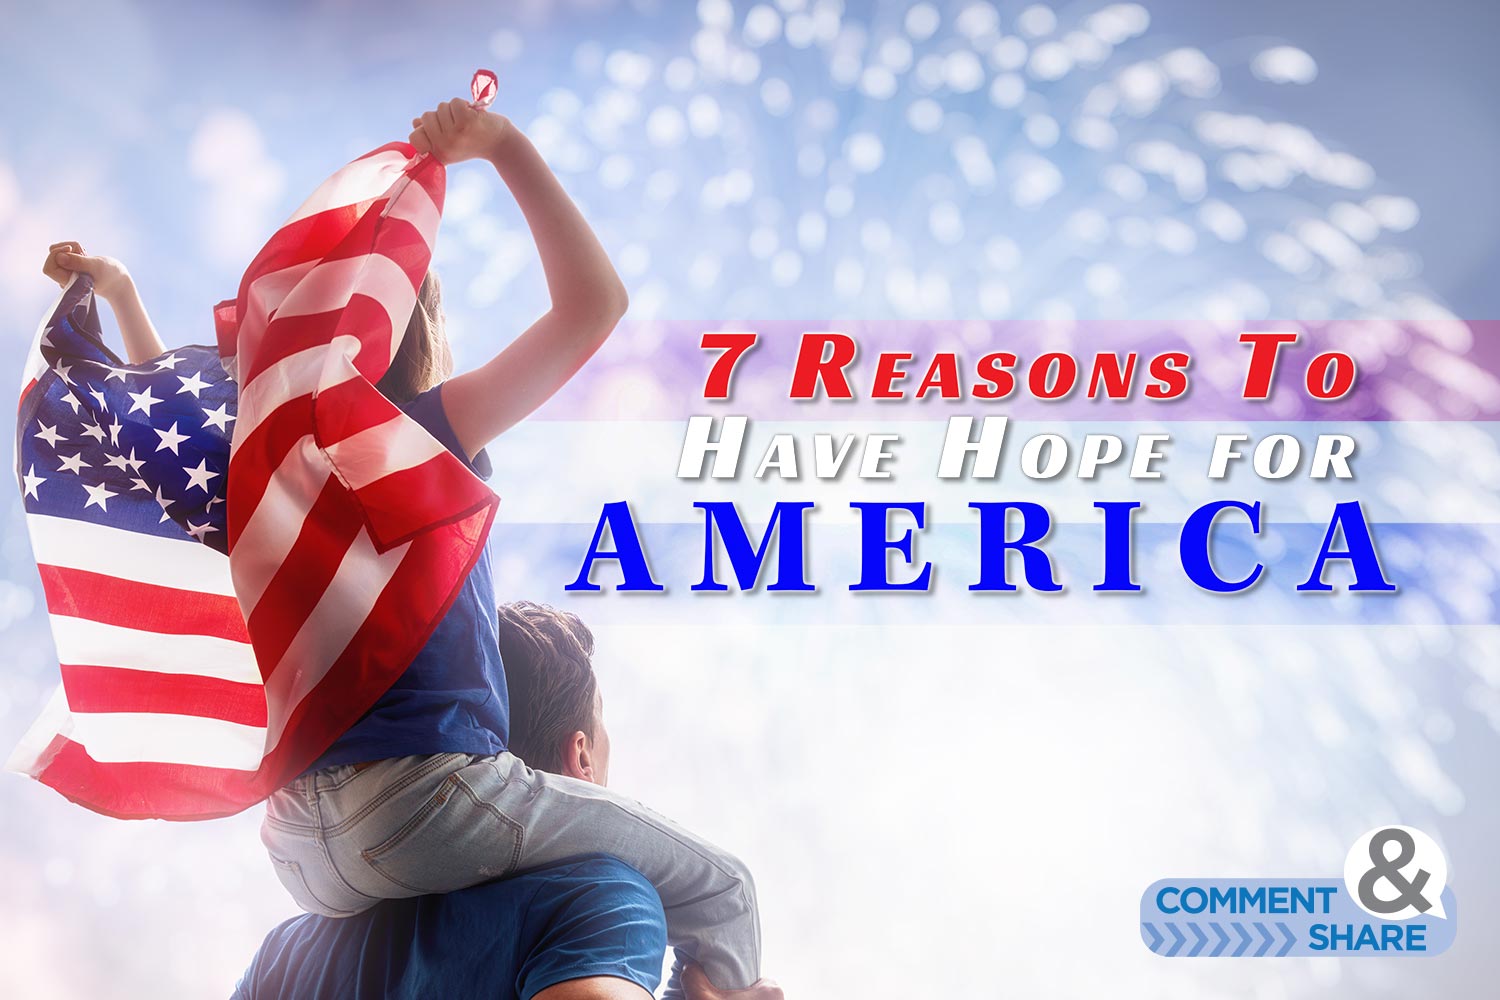 7 Reasons to Have Hope for America